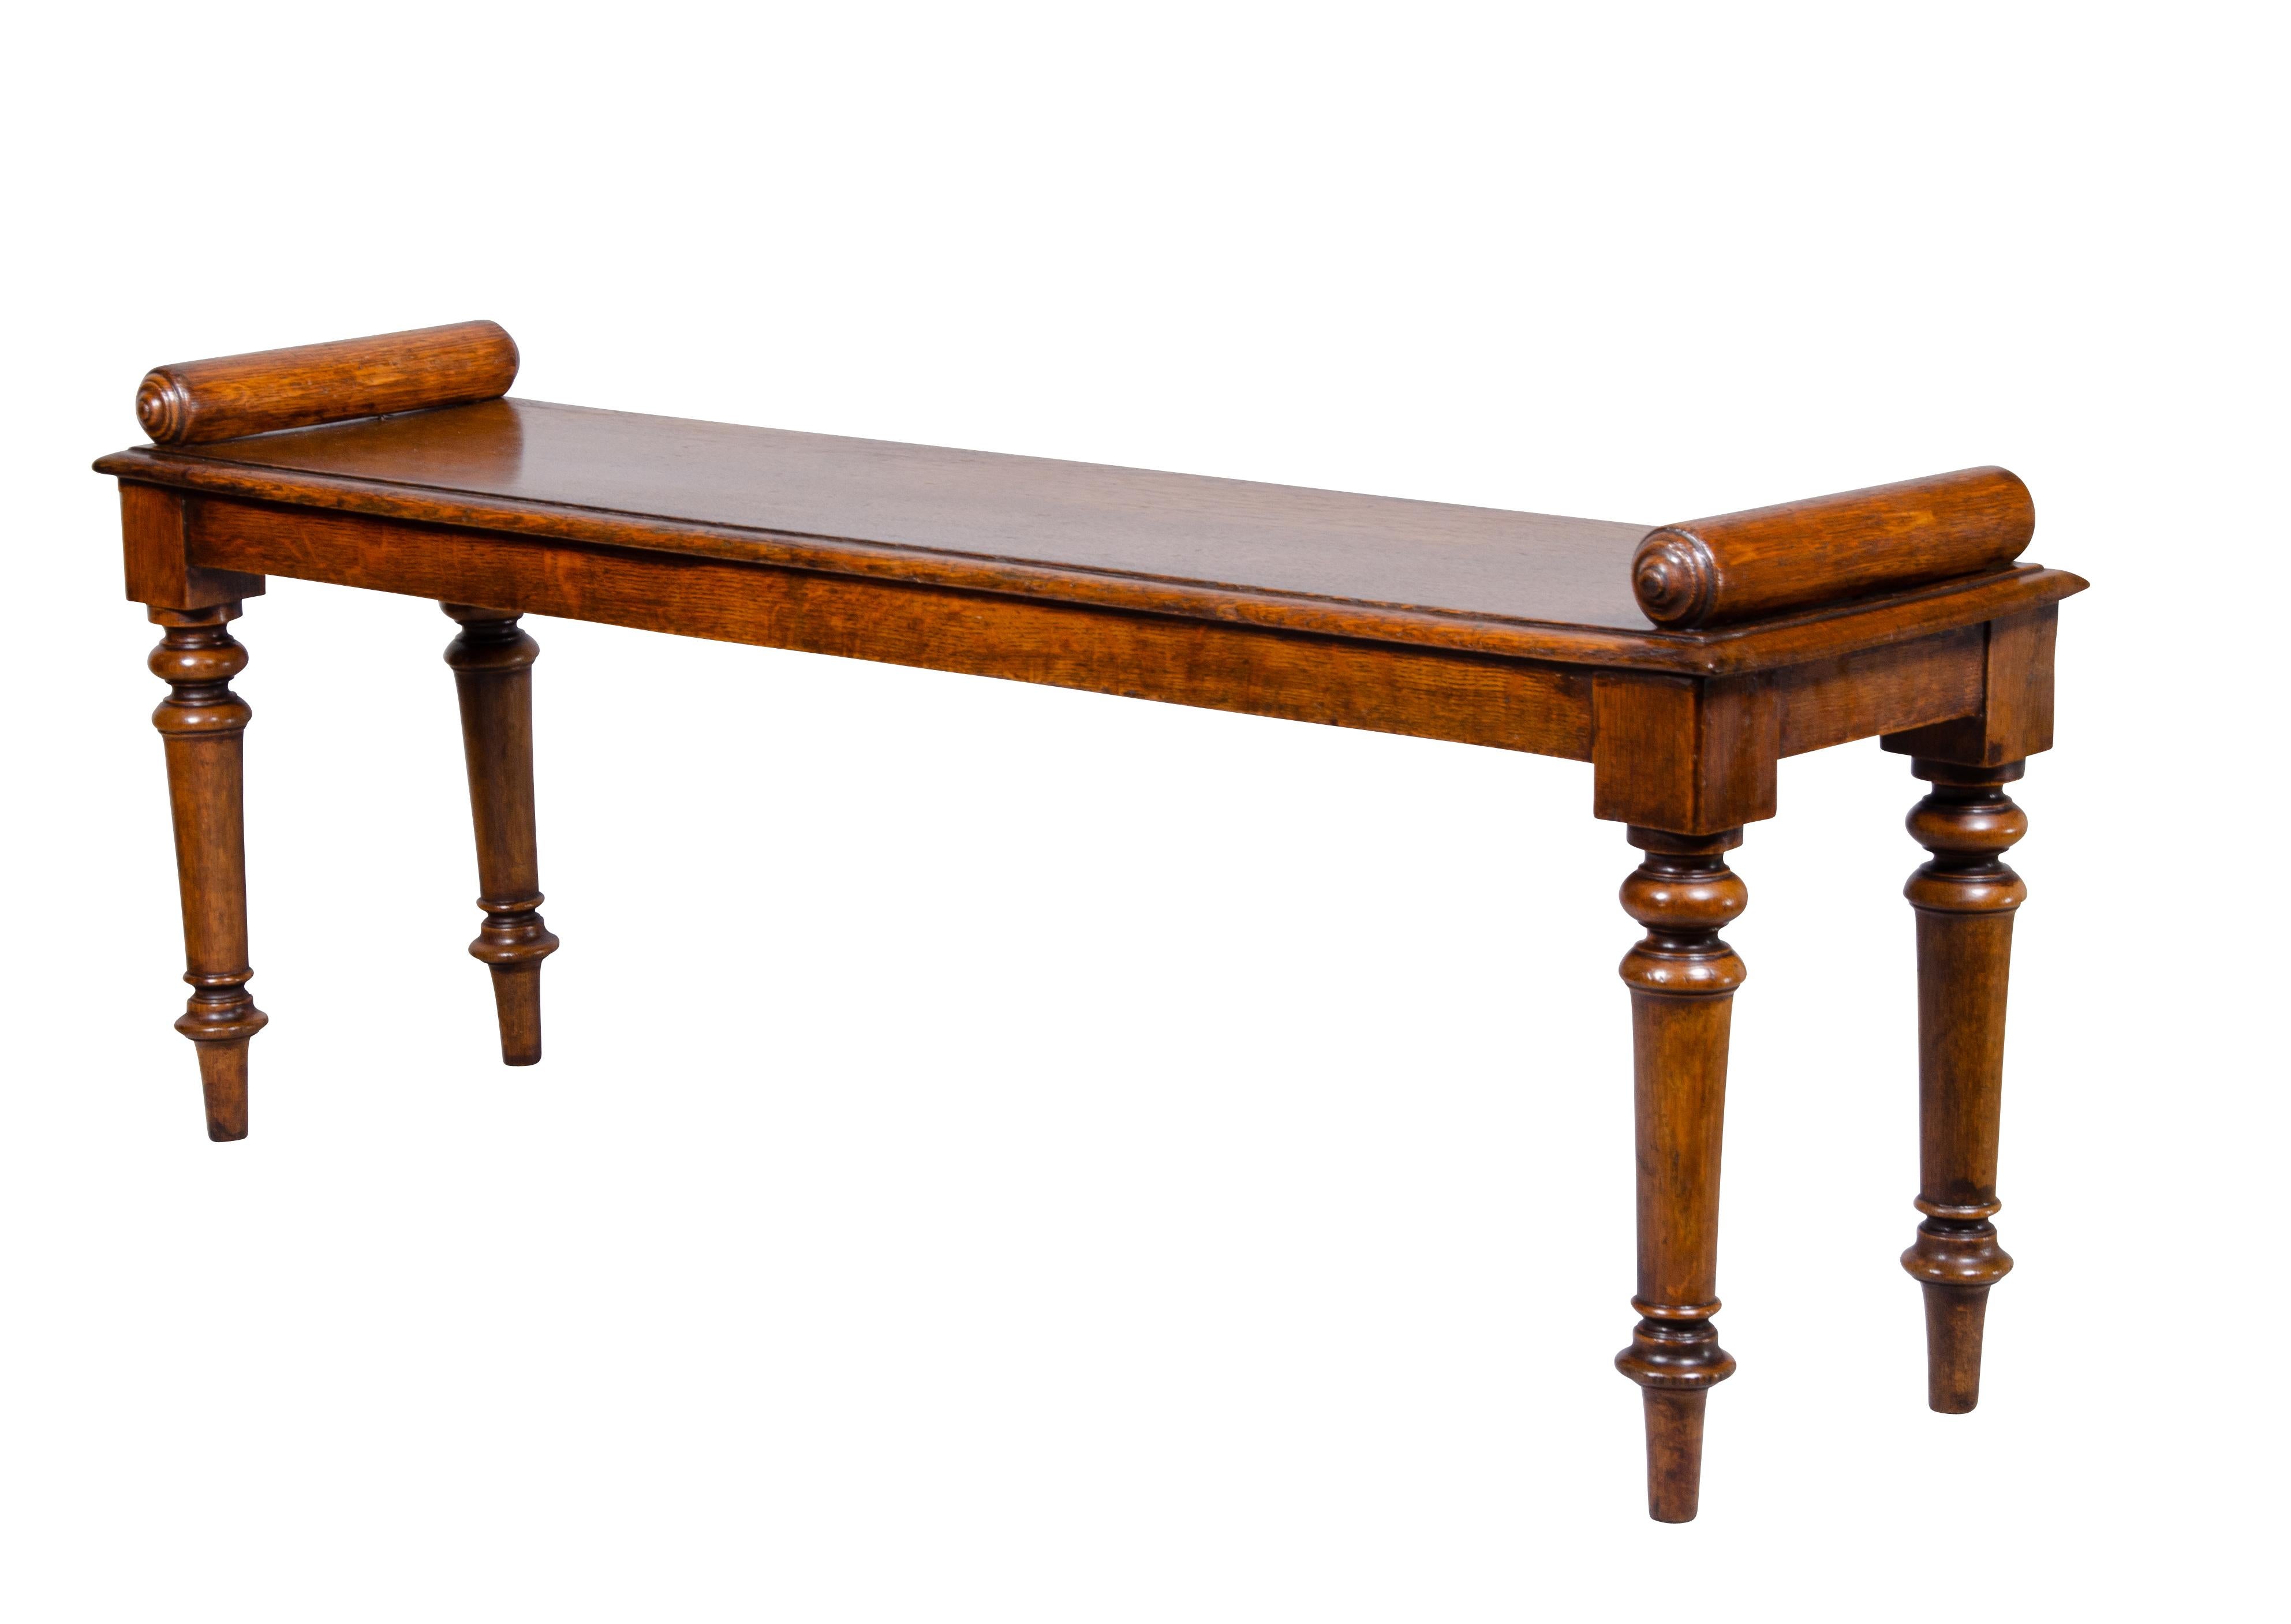 English Edwardian Oak Bench Attributed to Schoolbred